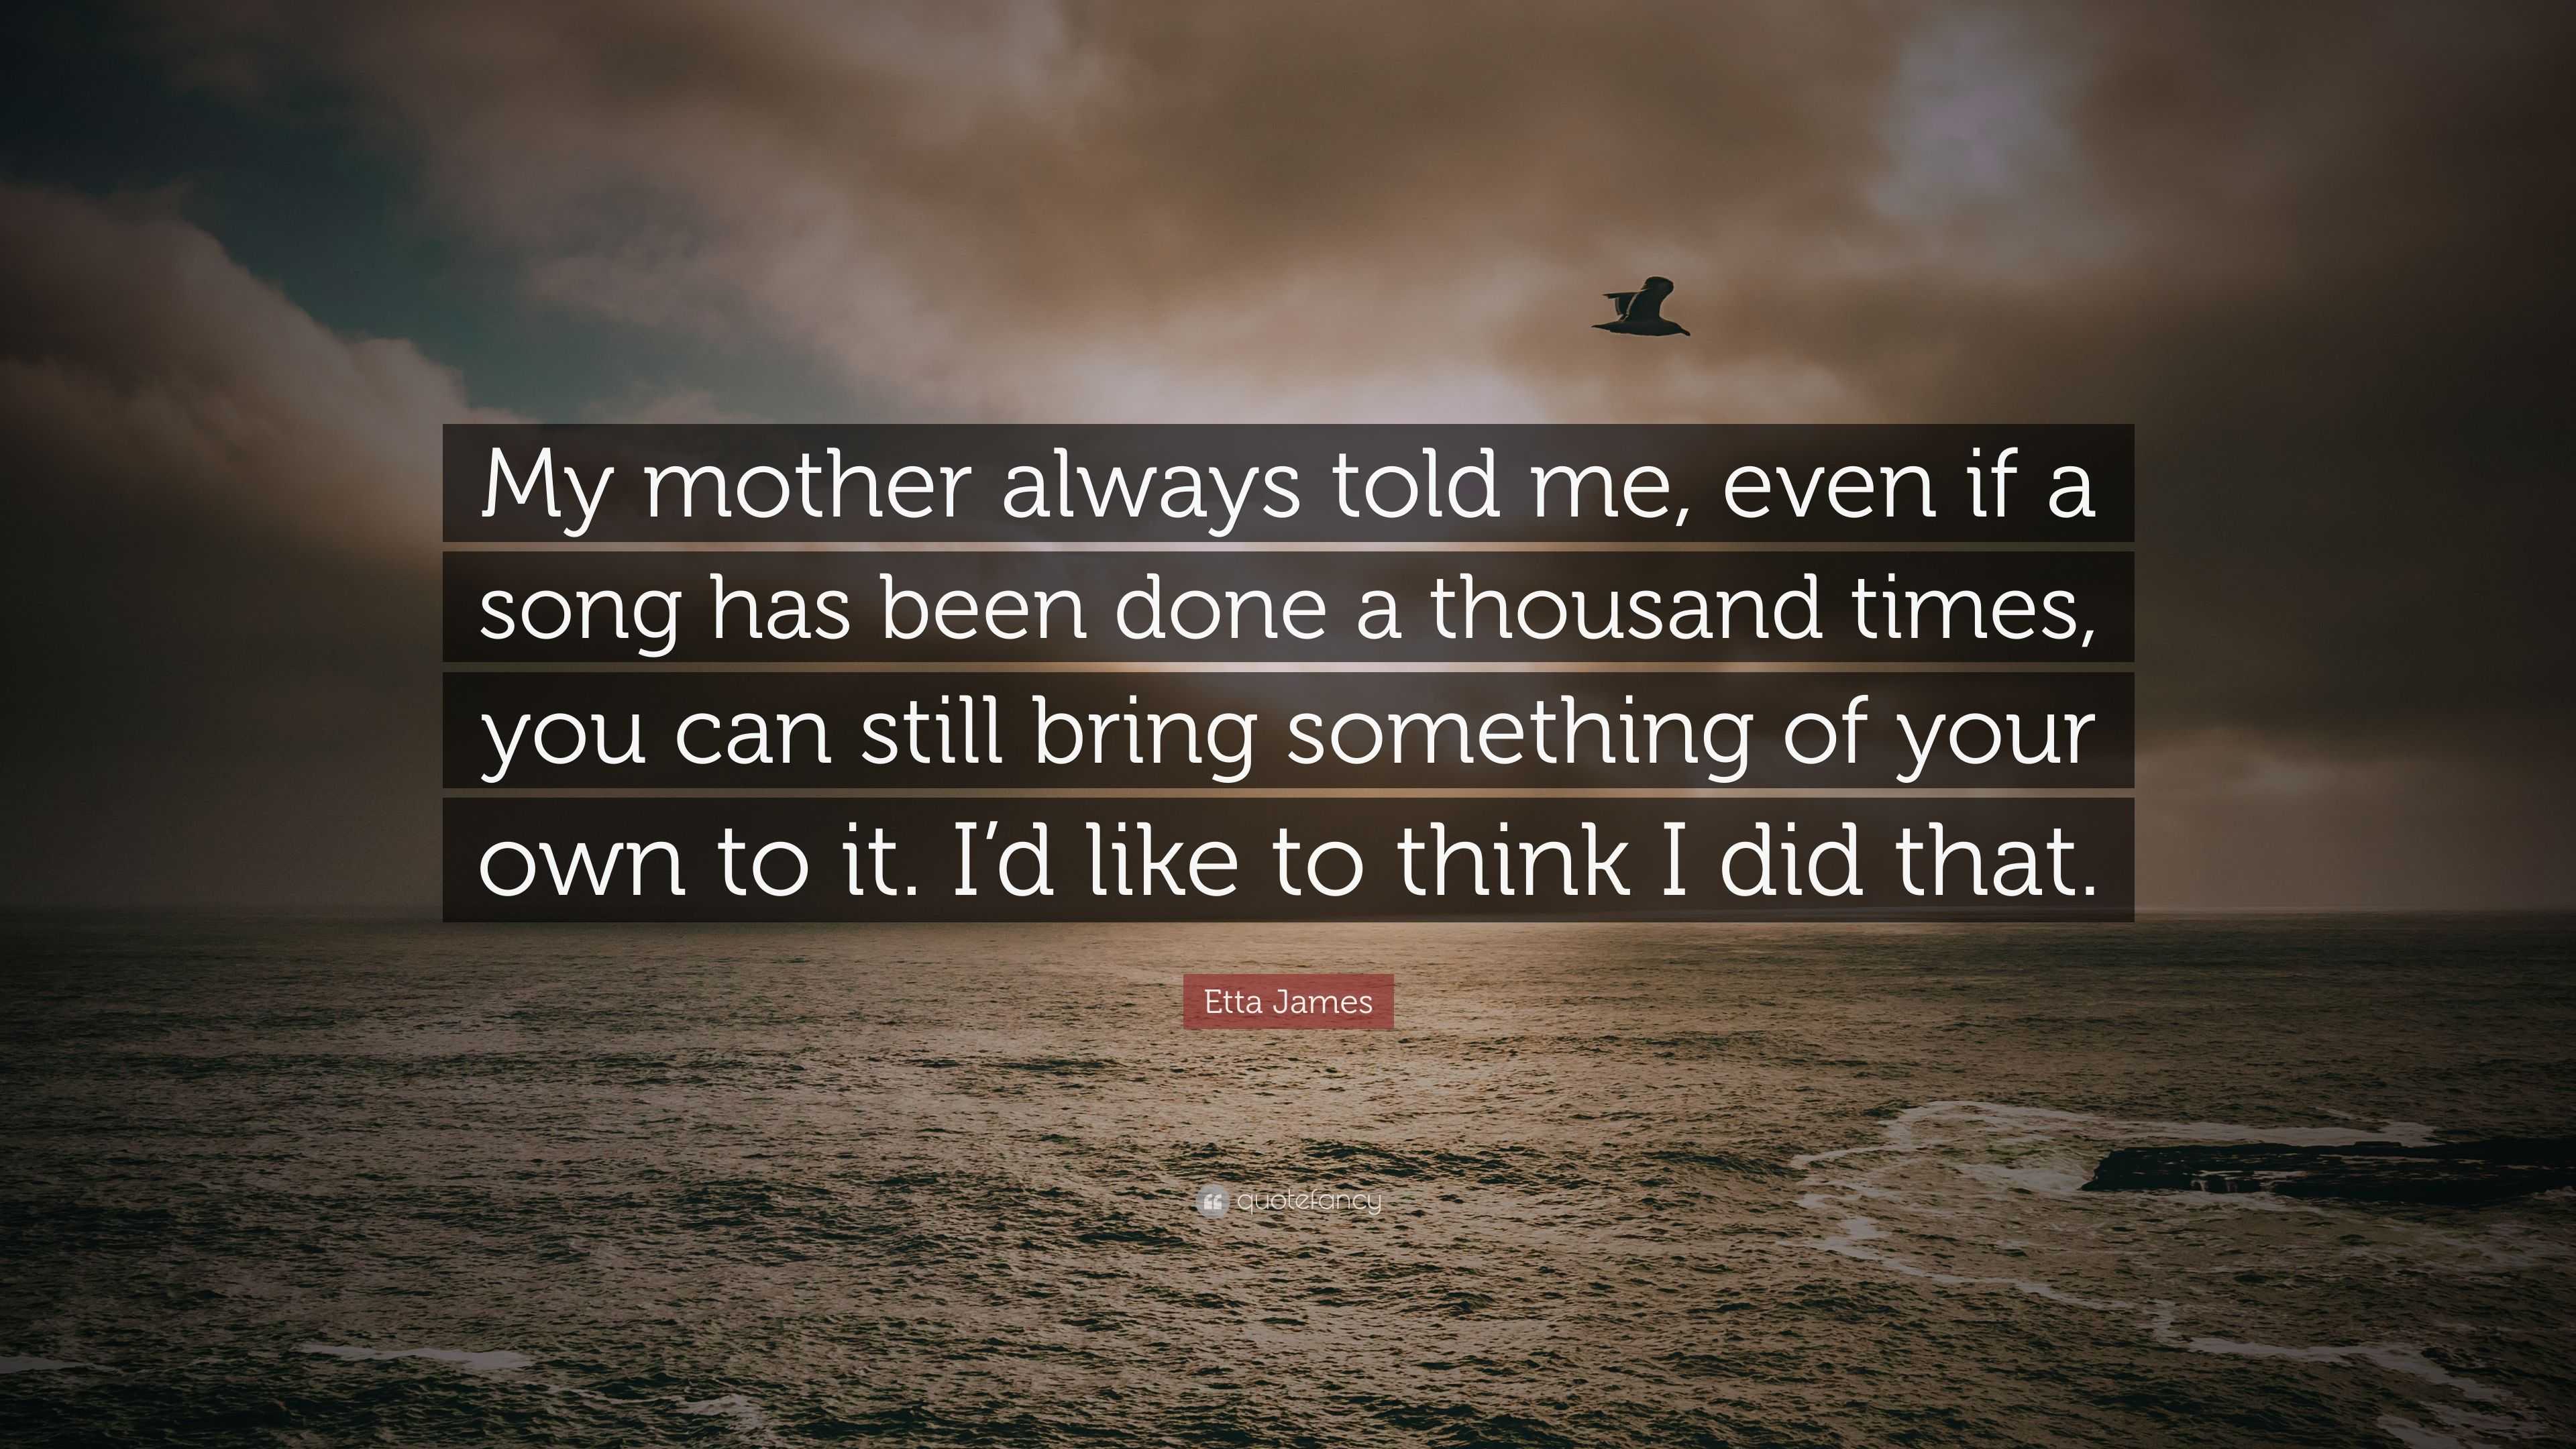 Etta James Quote: “My mother always told me, even if a song has been ...